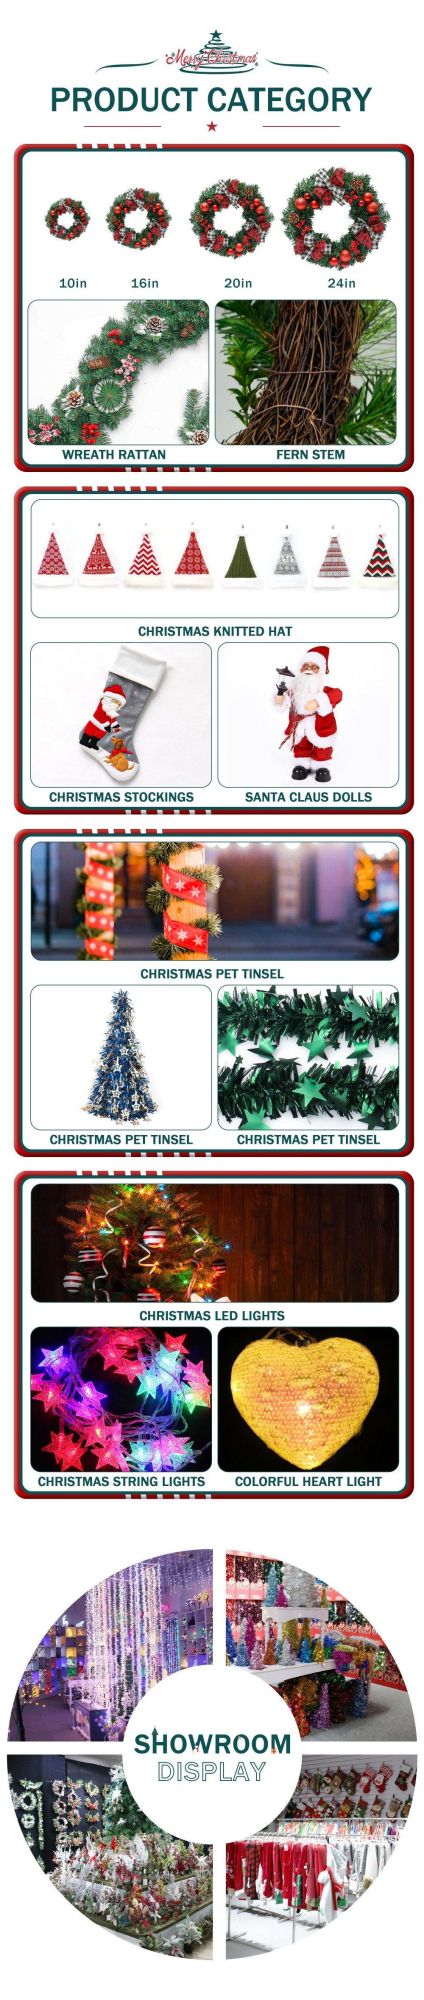 Christmas Pet Material Ornaments Tinsel Garland Home Decoration